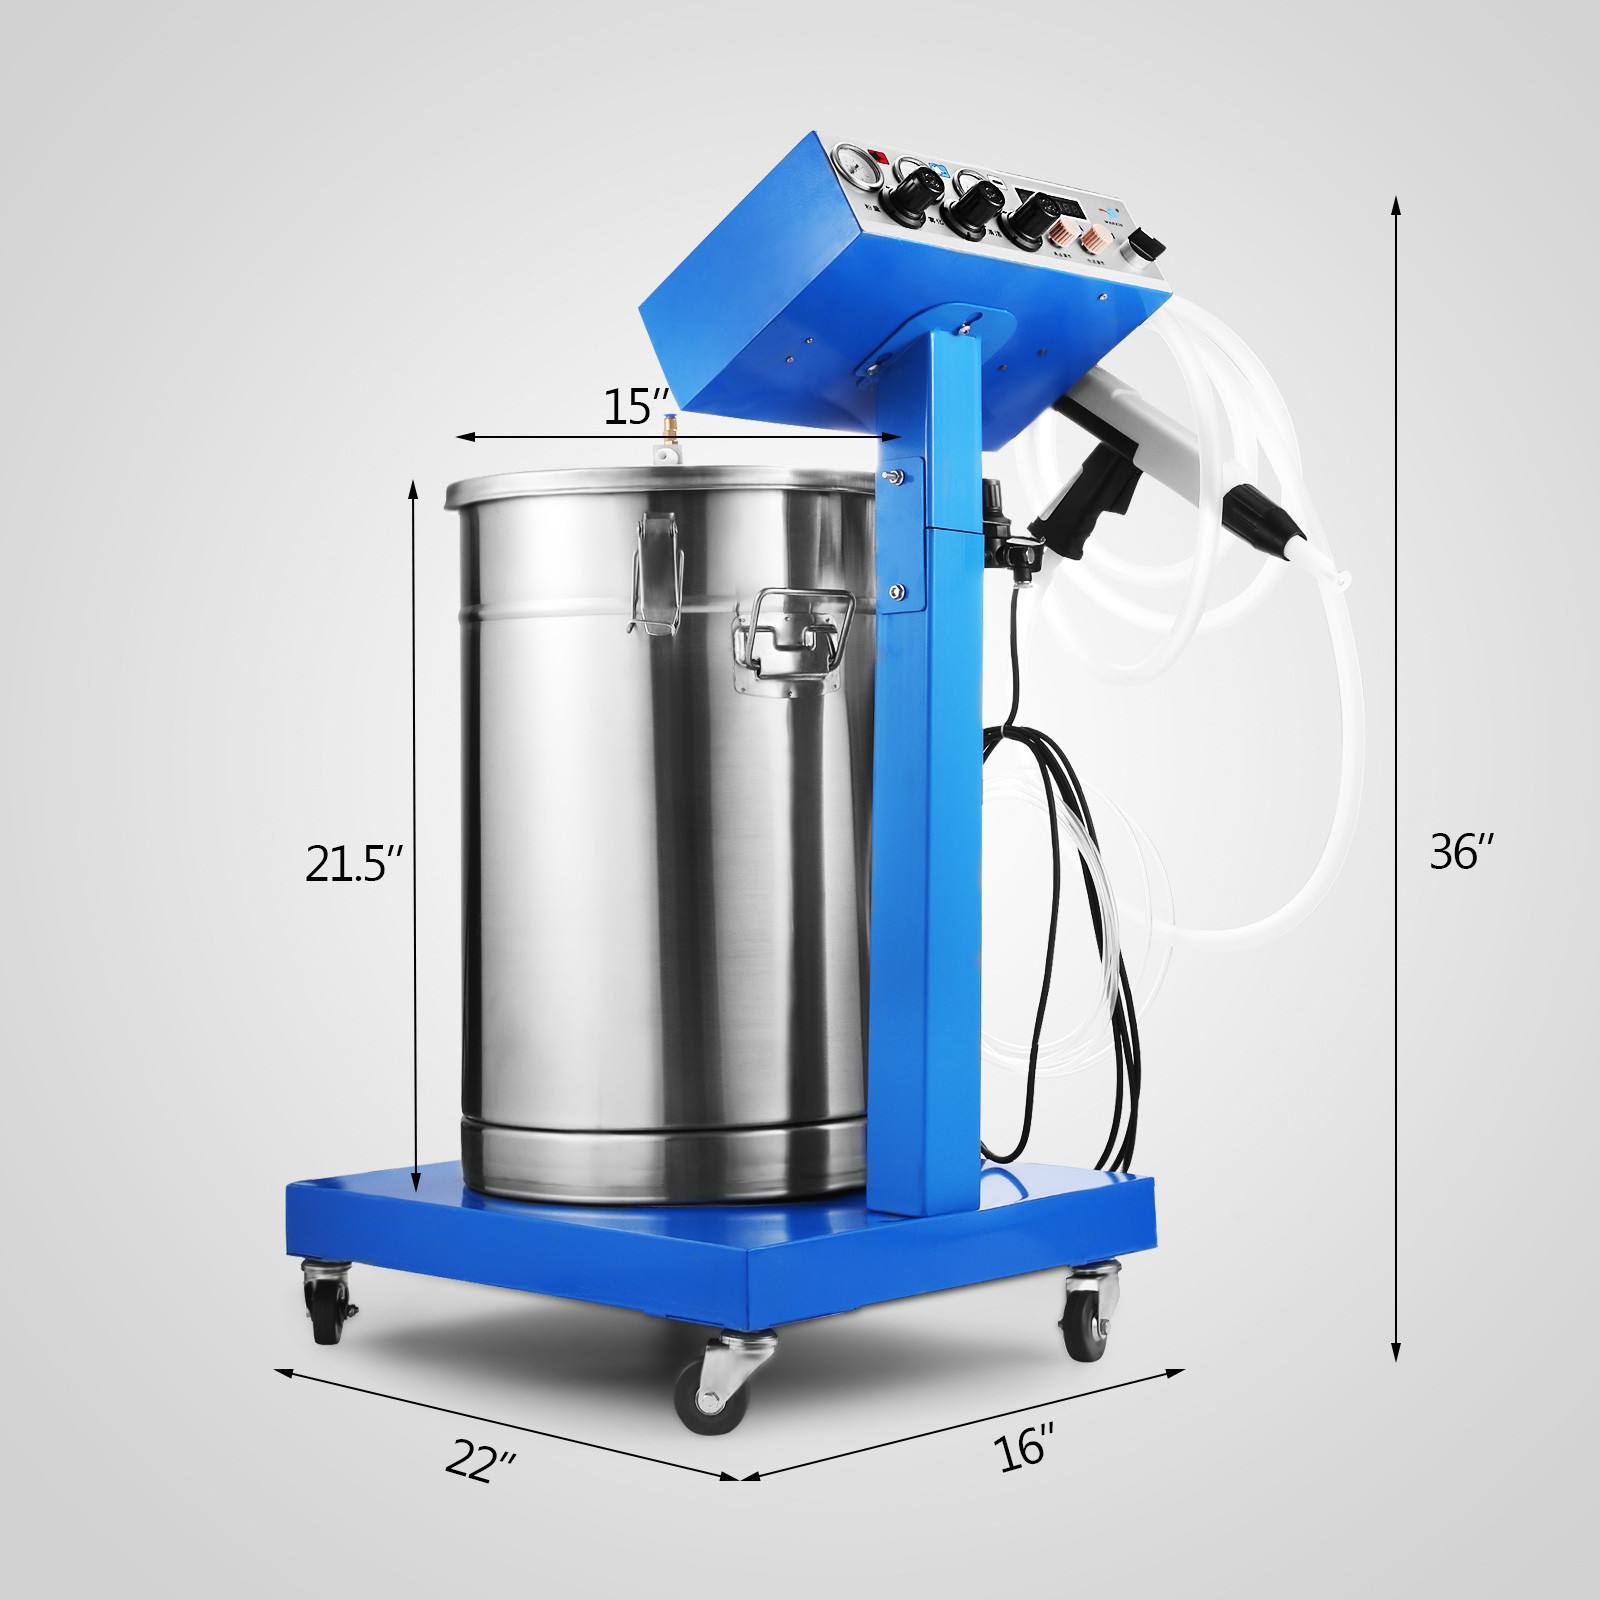 Hot sale Factory Price CE Proved WX-958 powder Coating Machine with spray gun